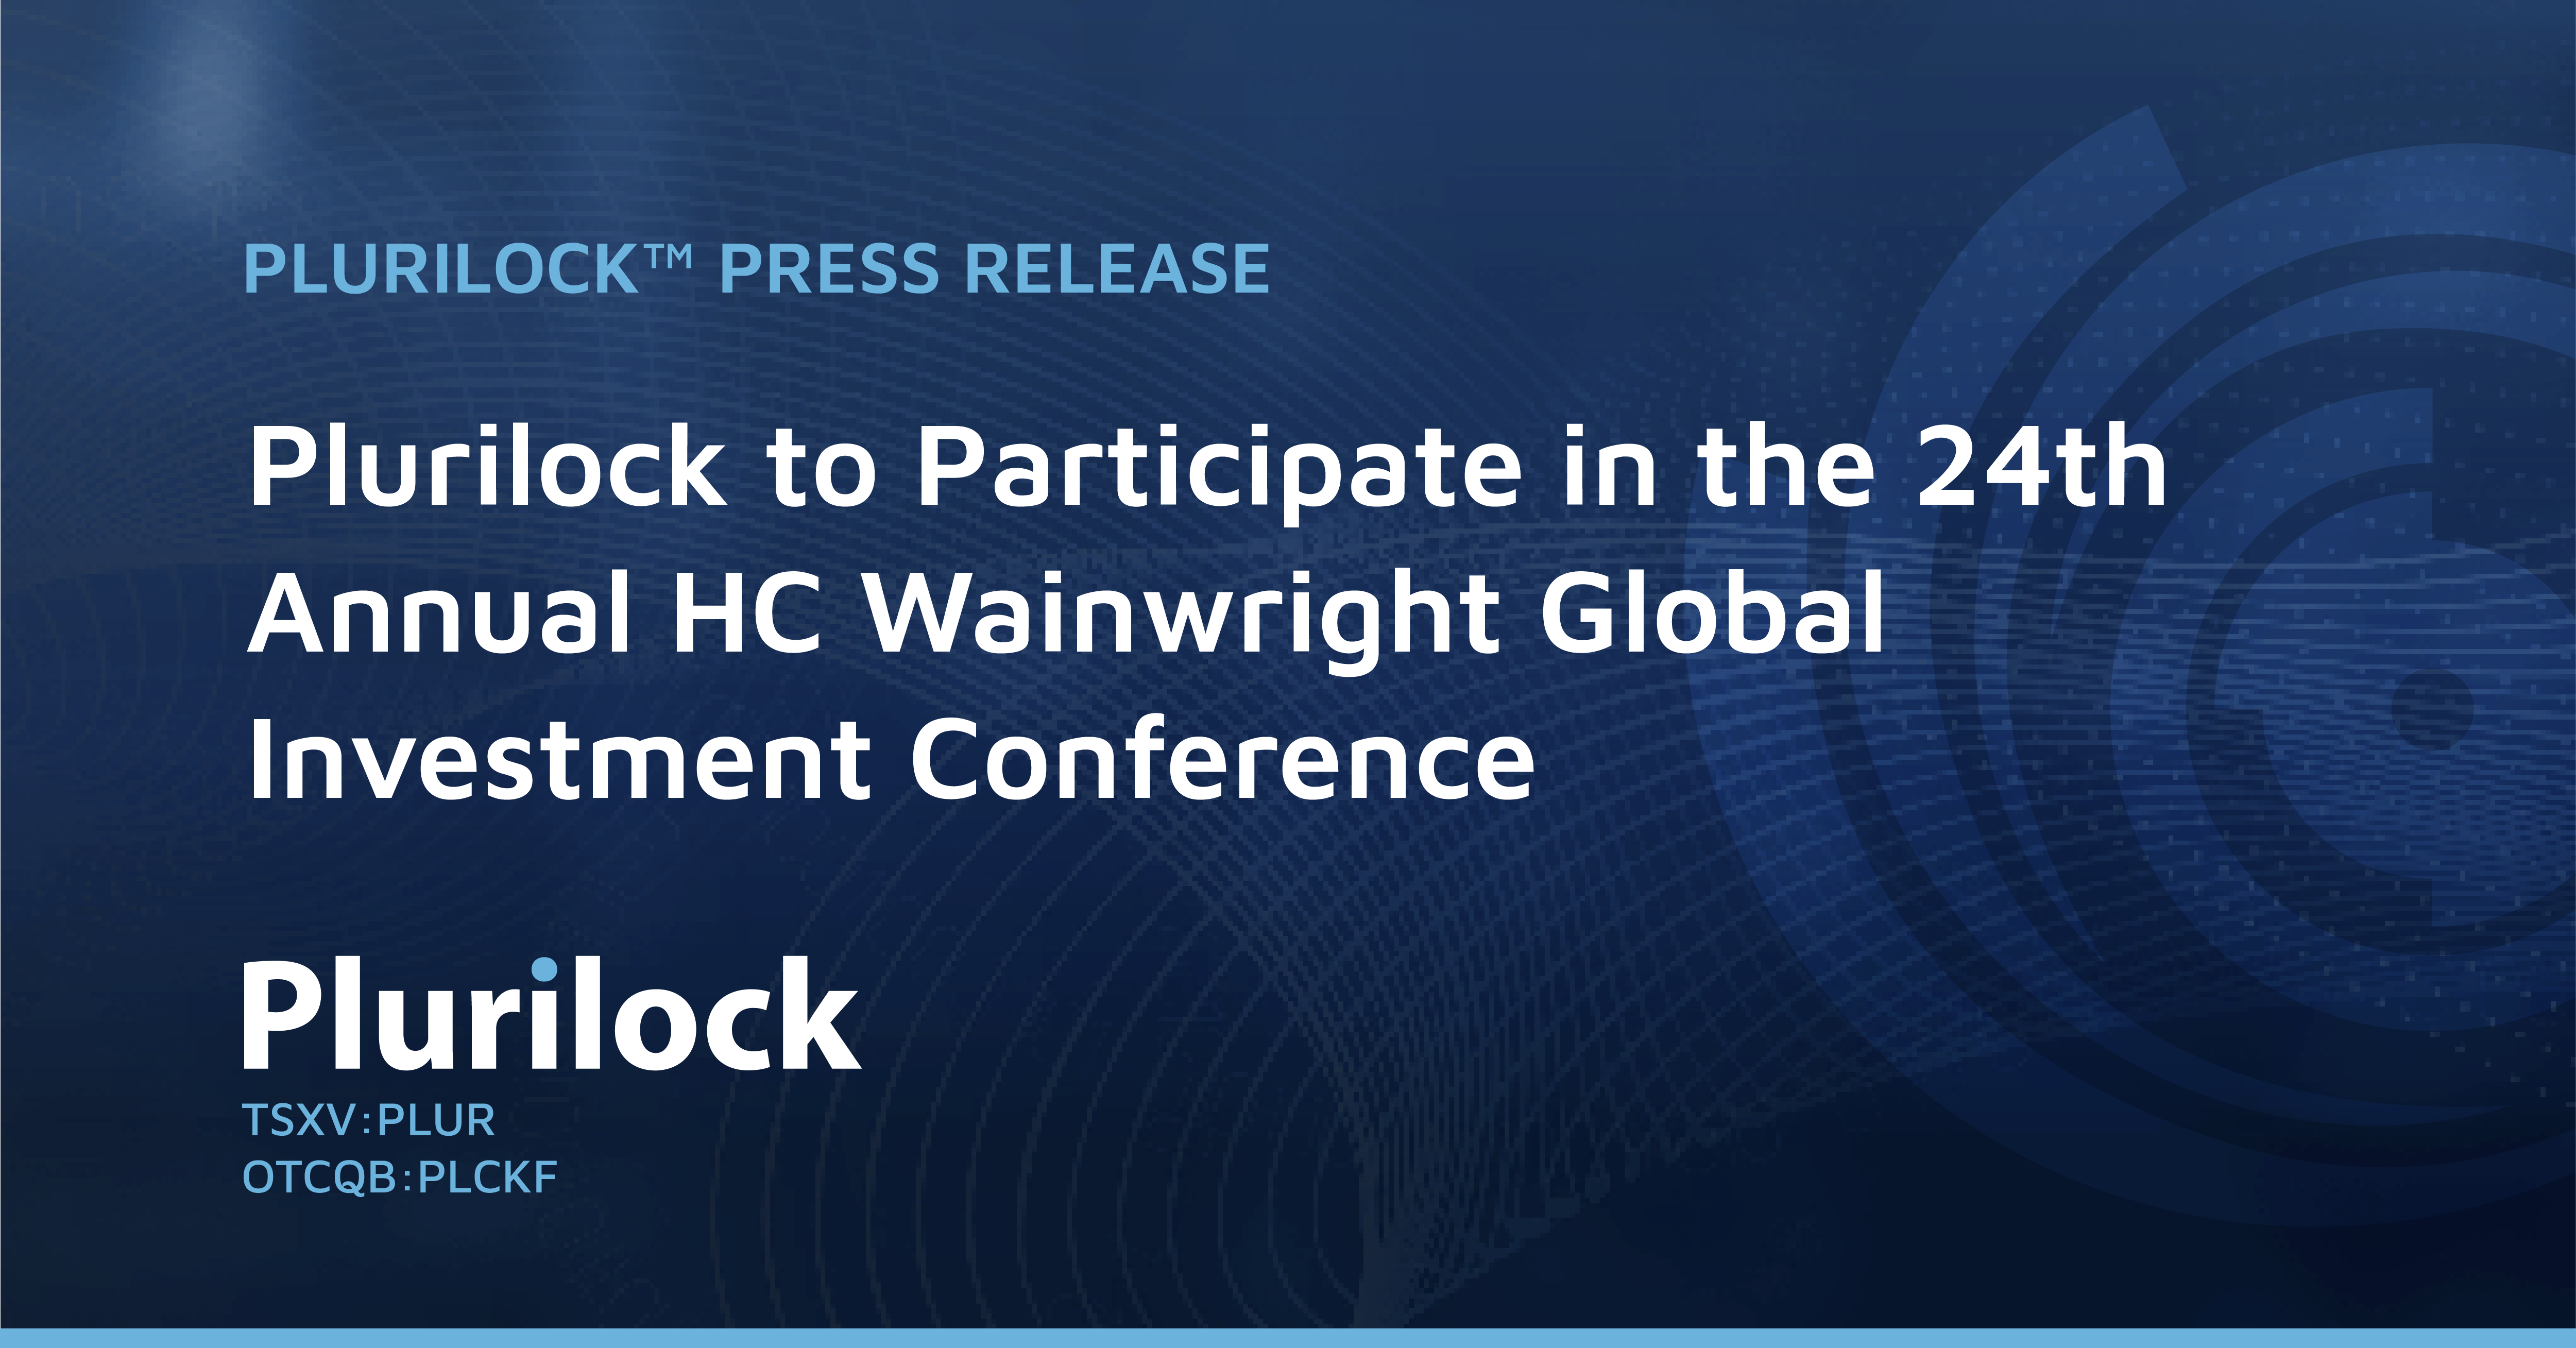 Plurilock to Participate in the 24th Annual HC Wainwright Global